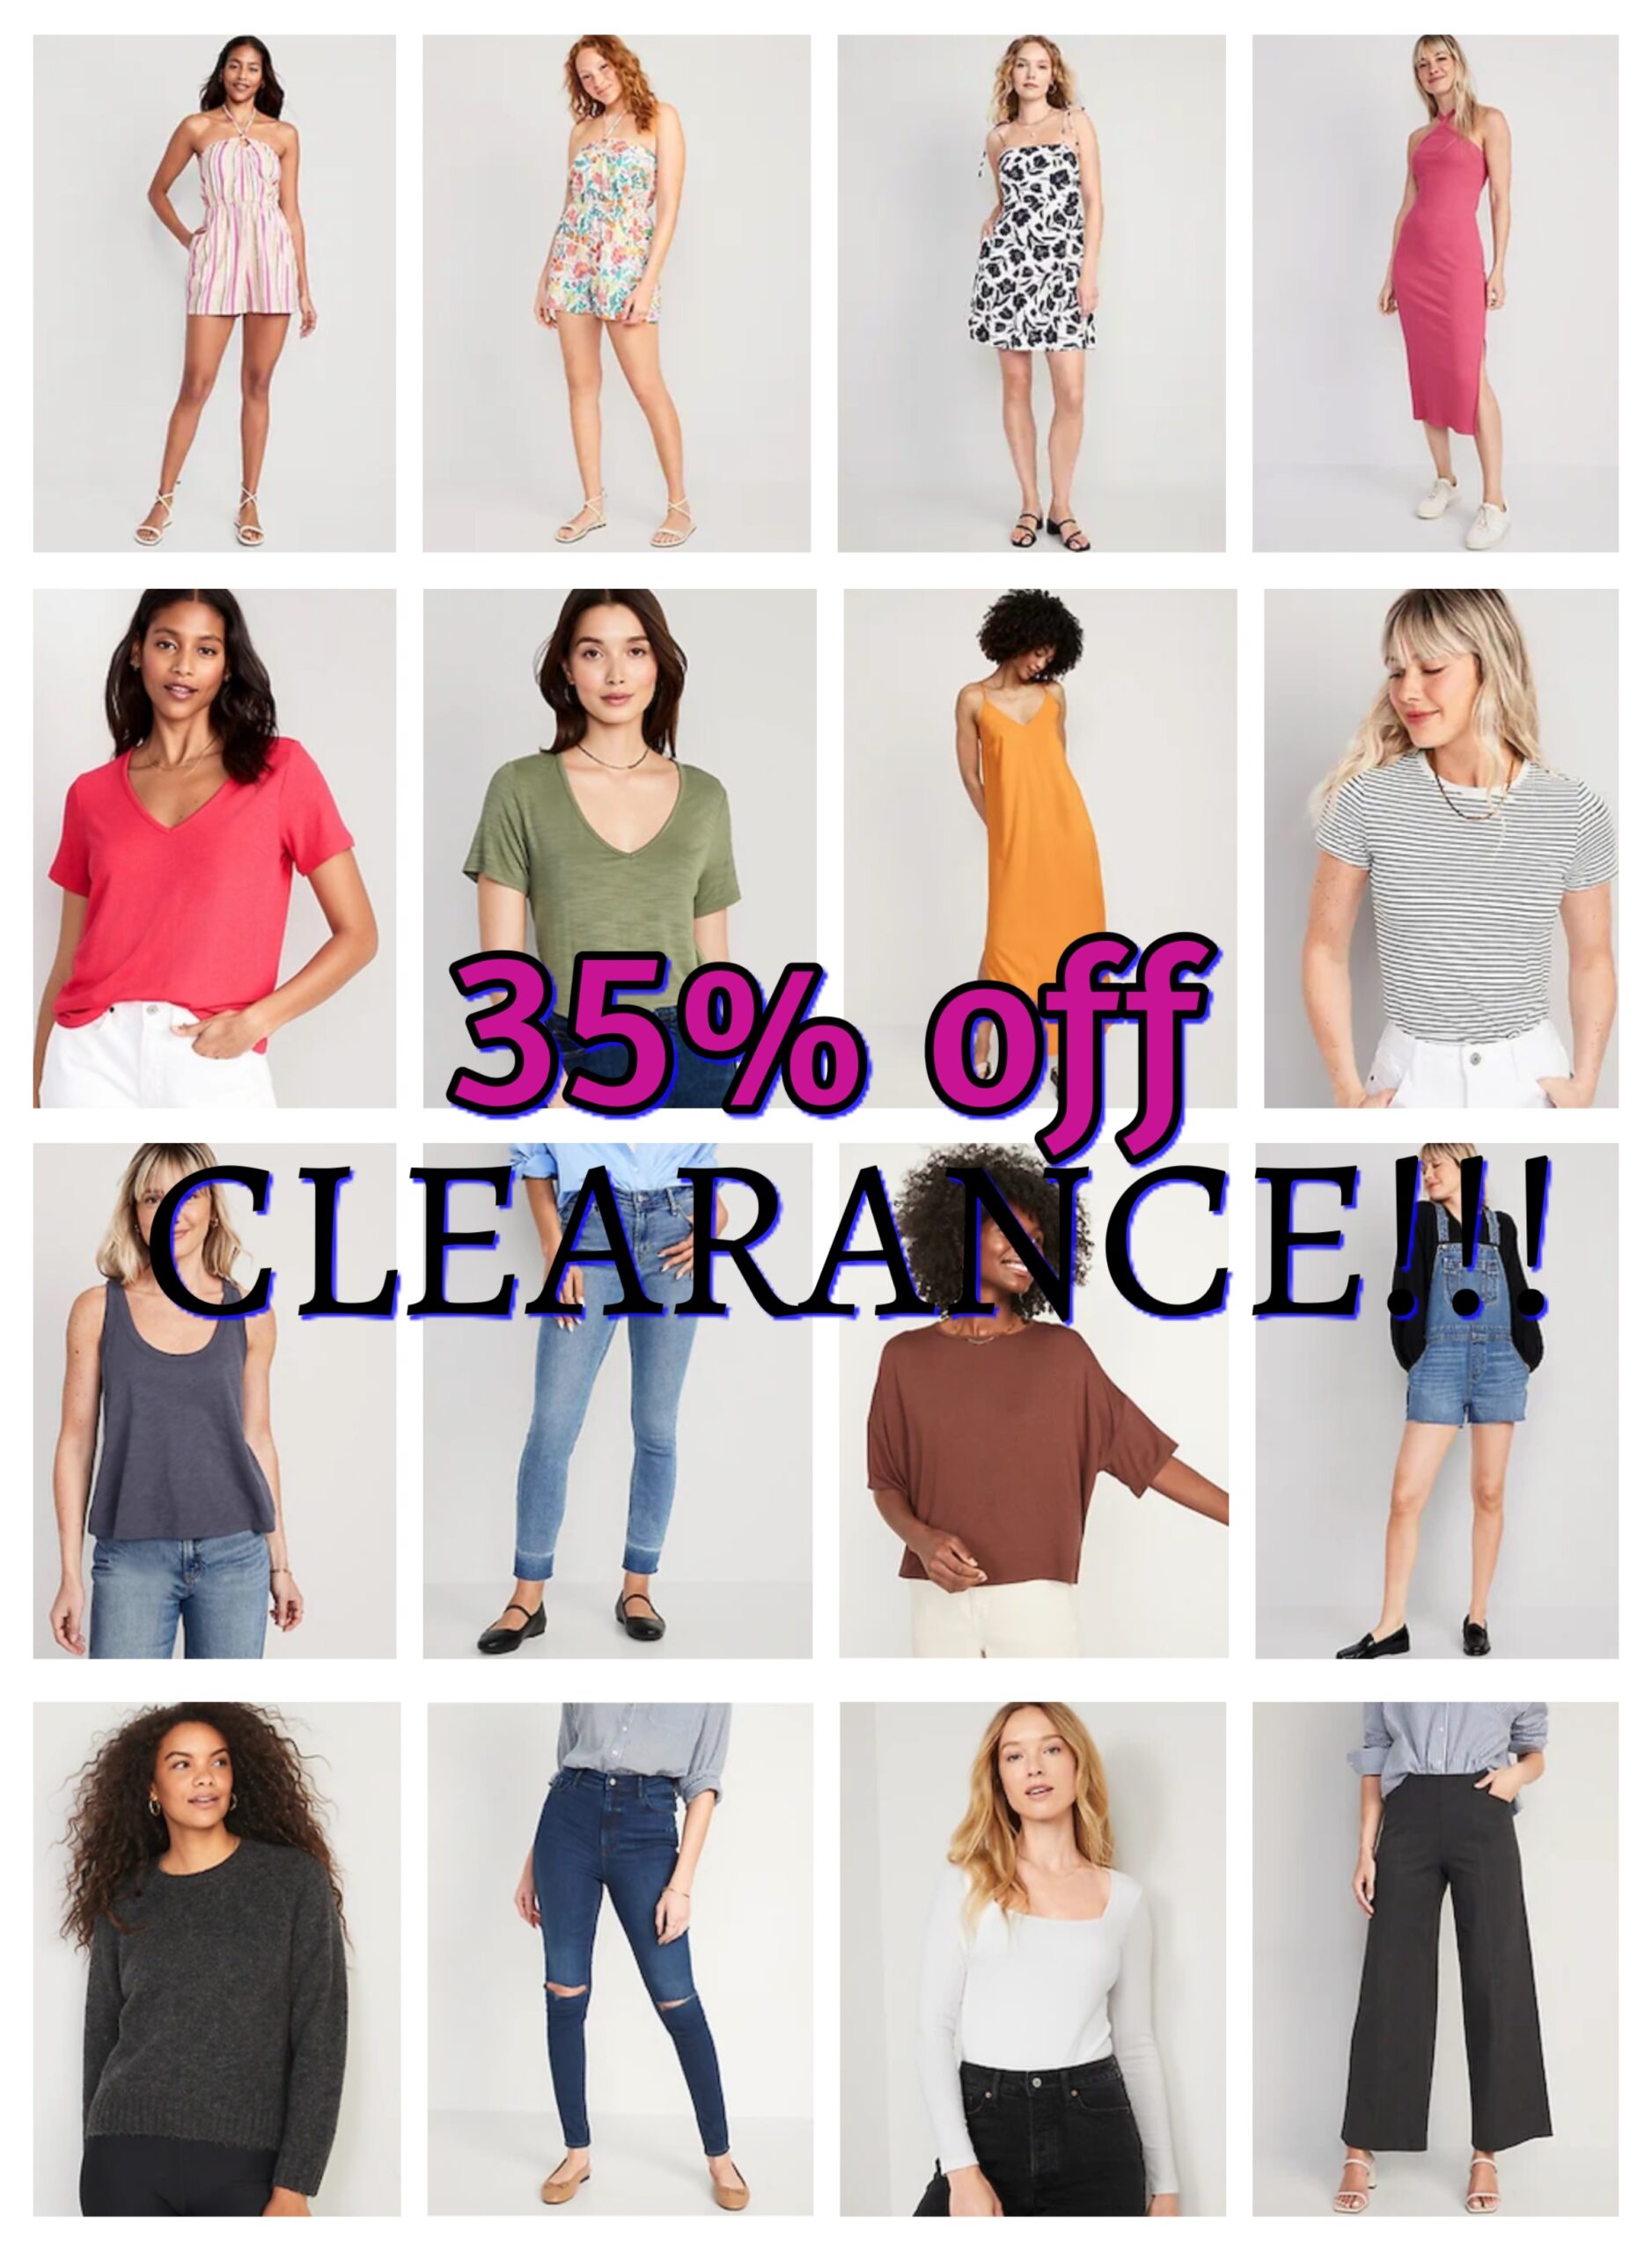 INSANE CLEARANCE PRICES!